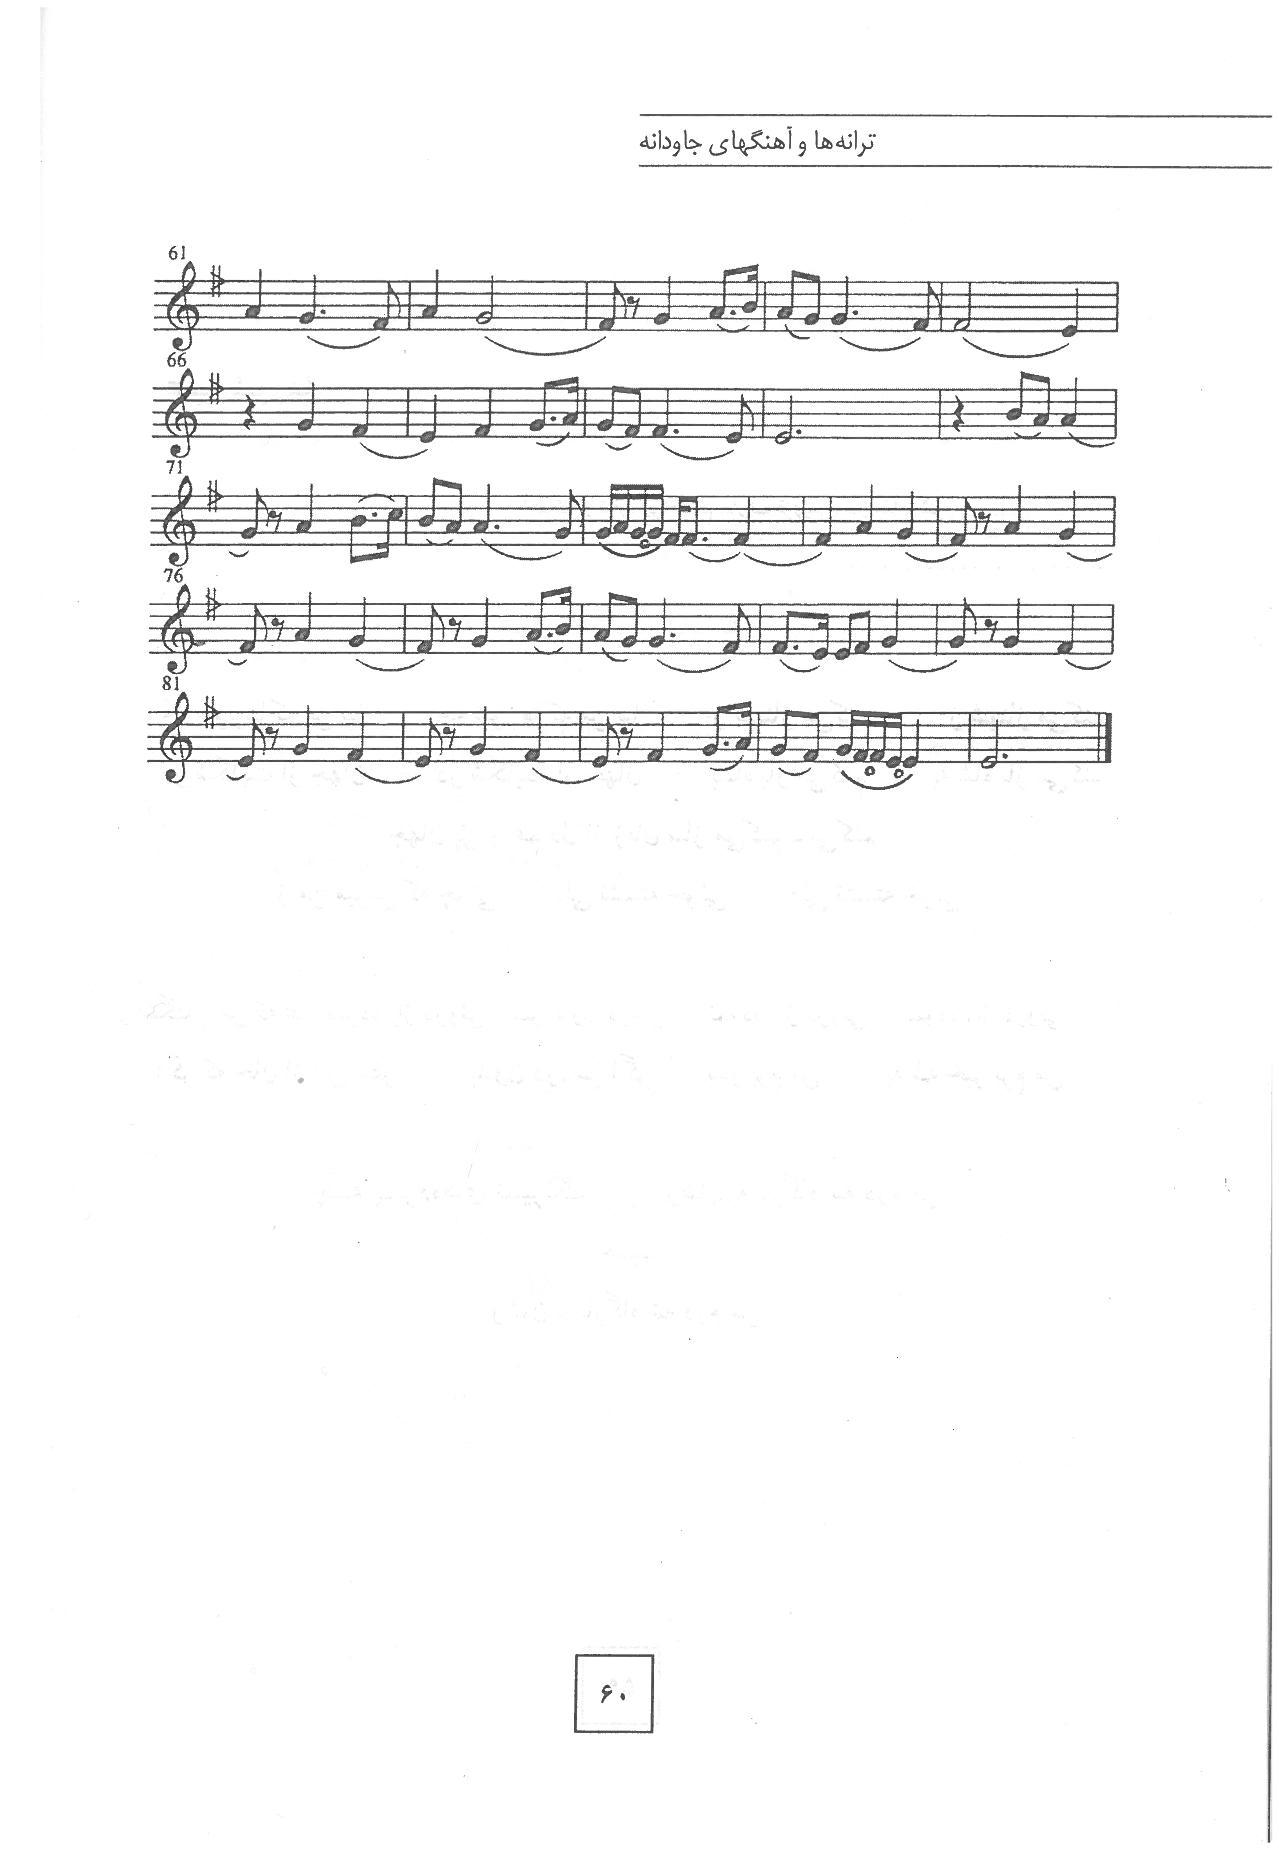 A sheet music with five different notes in it.